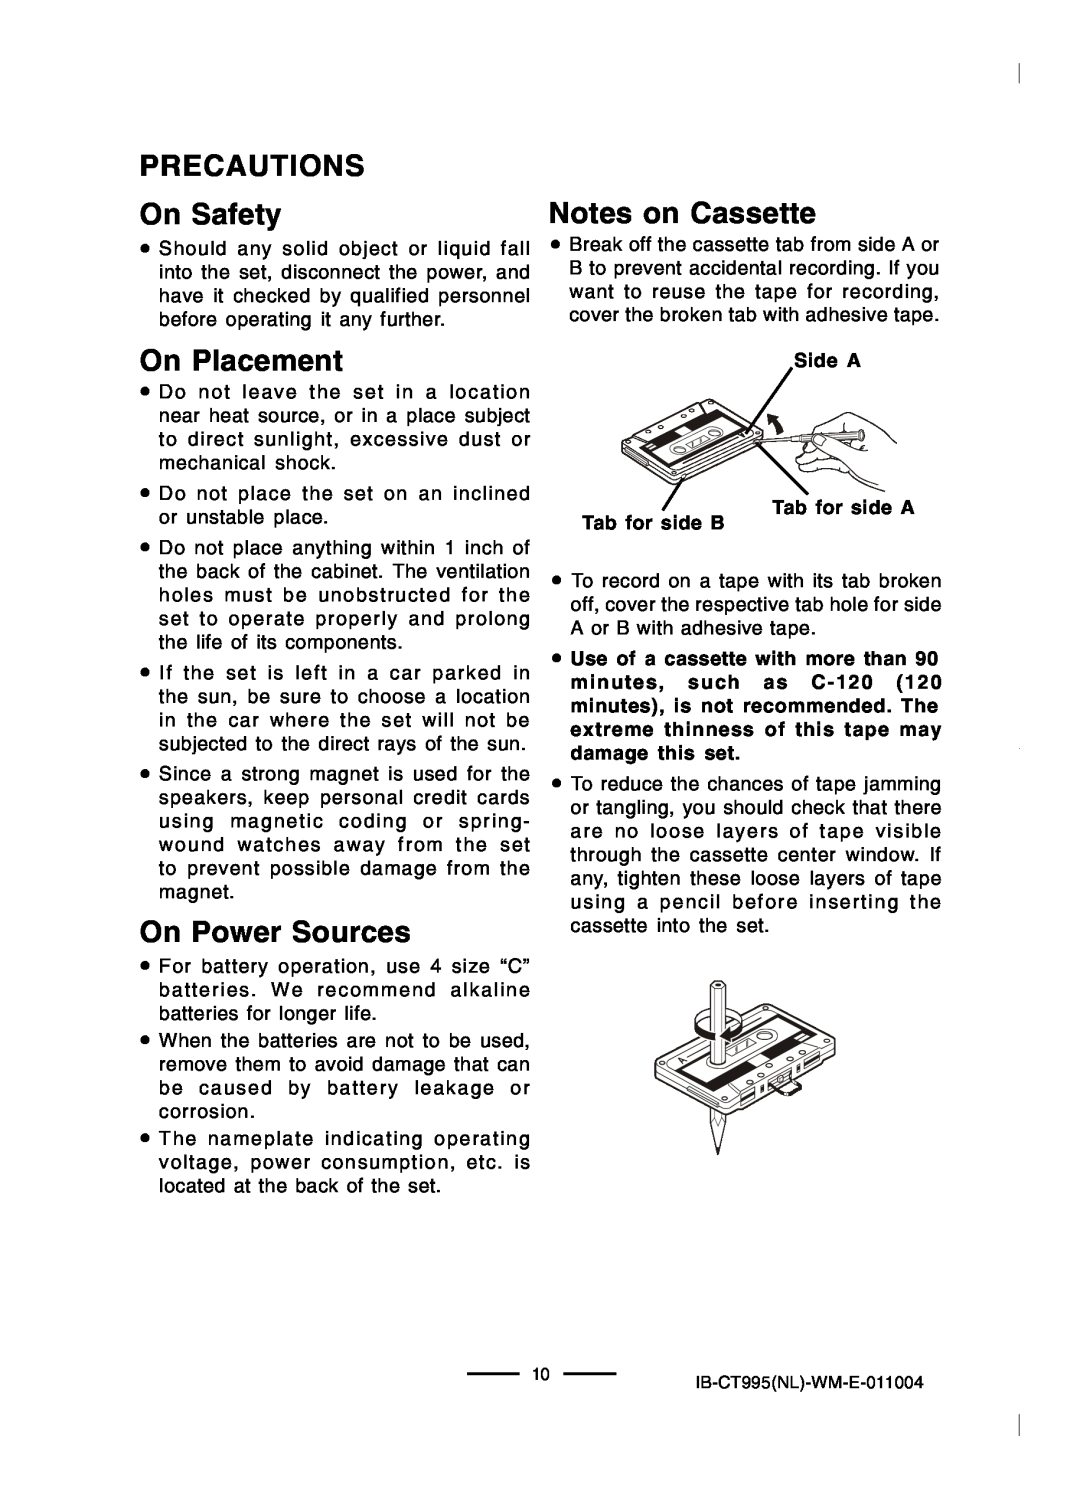 Lenoxx Electronics CT-995 operating instructions PRECAUTIONS On Safety, Notes on Cassette, On Placement, On Power Sources 